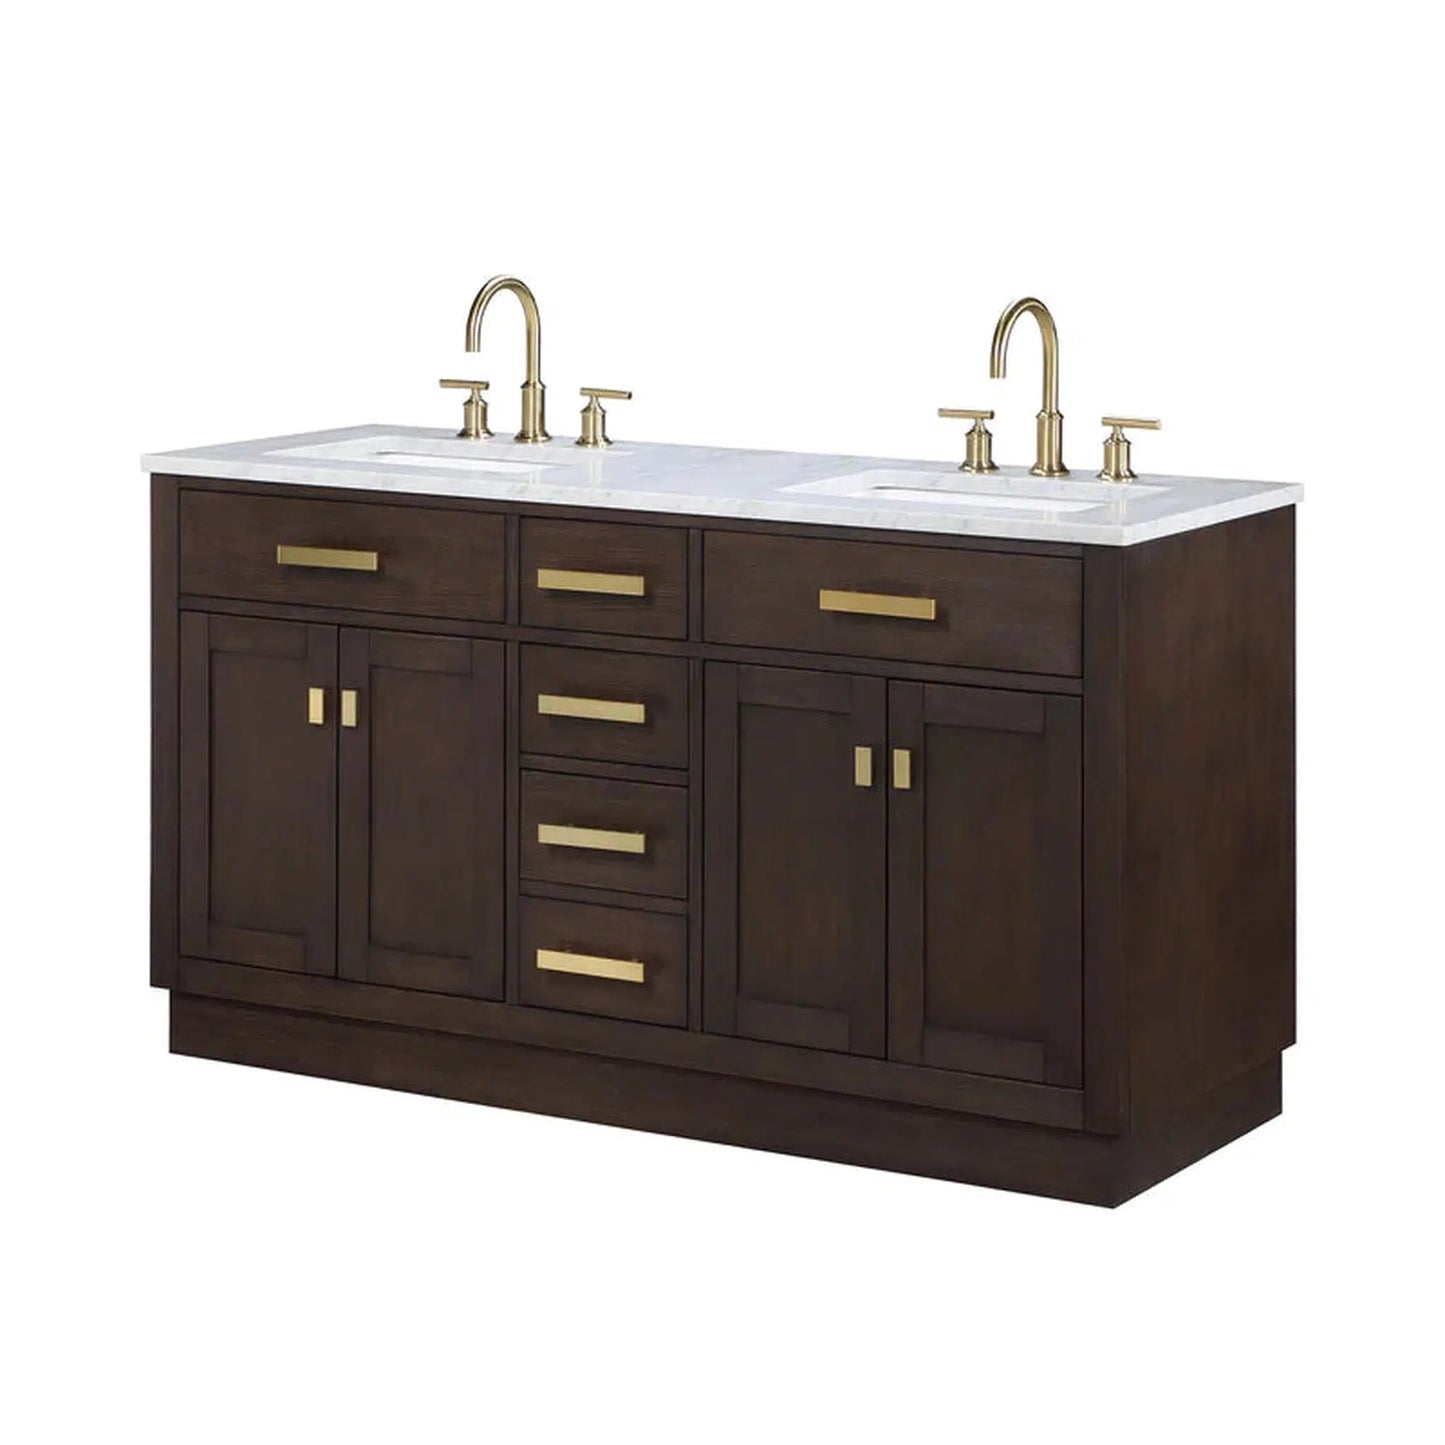 Water Creation Chestnut 60" Double Sink Carrara White Marble Countertop Vanity In Brown Oak with Grooseneck Faucets and Mirrors